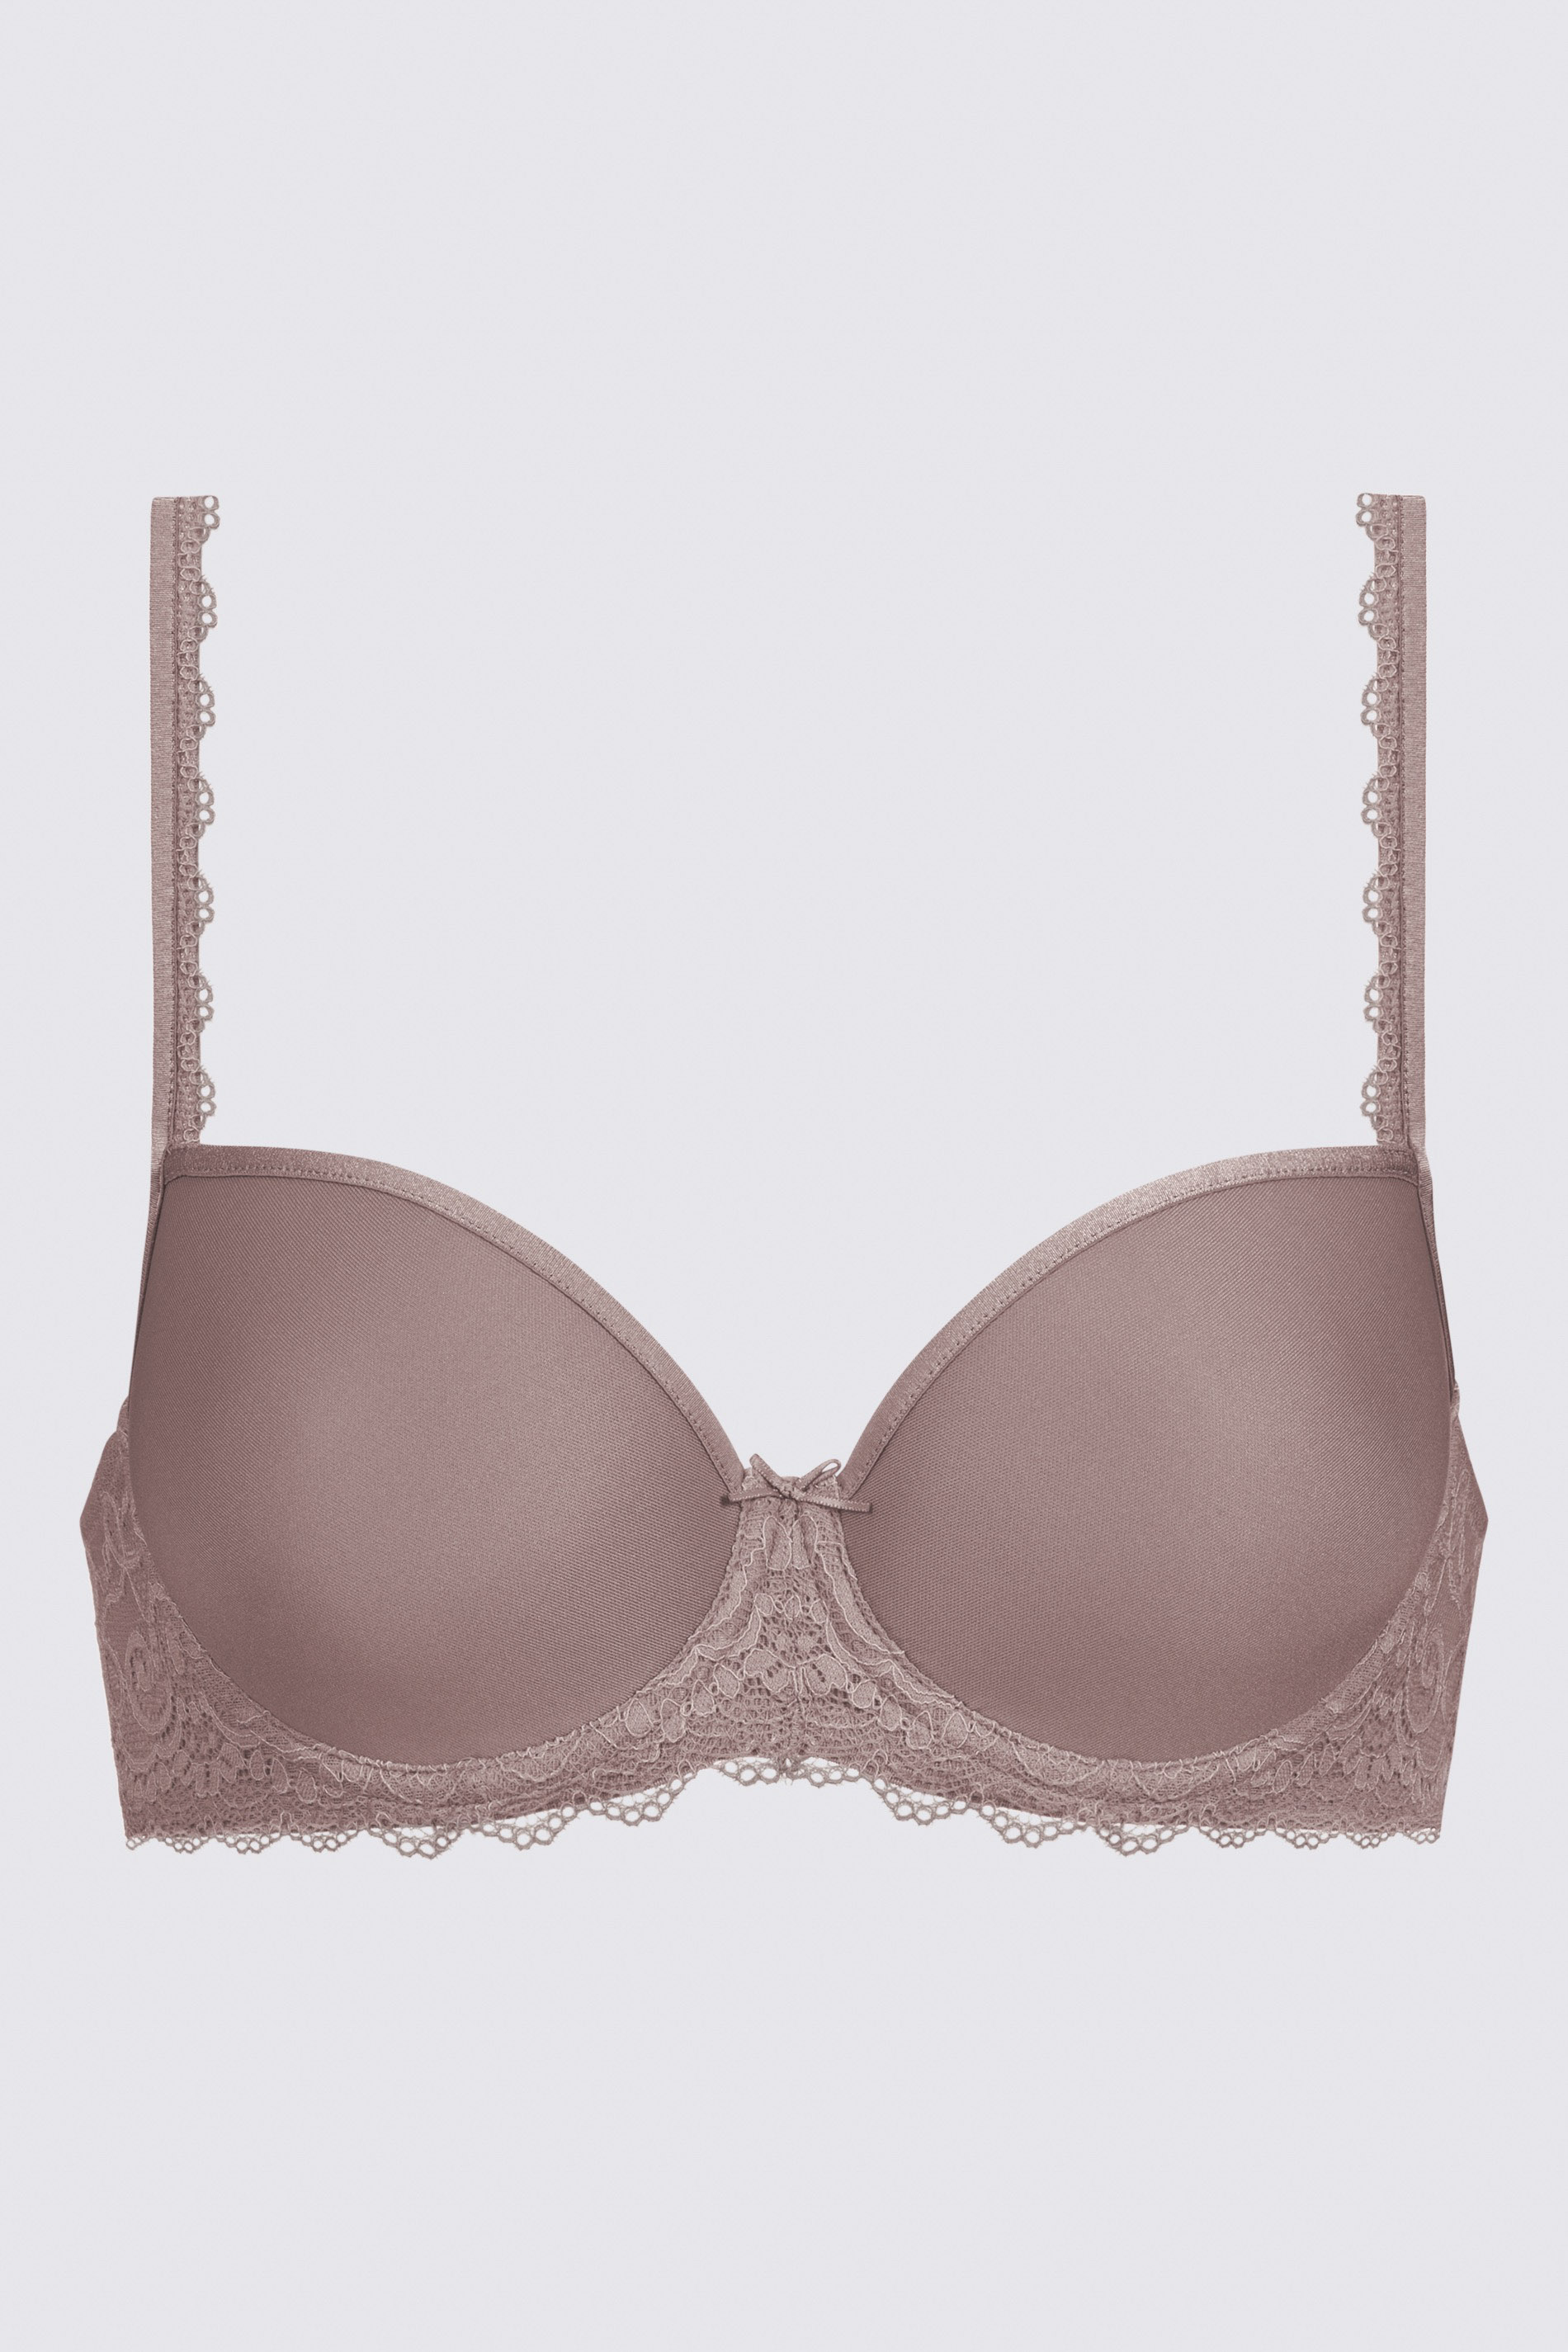 Spacer bra | Half Cup Serie Amorous Cut Out | mey®